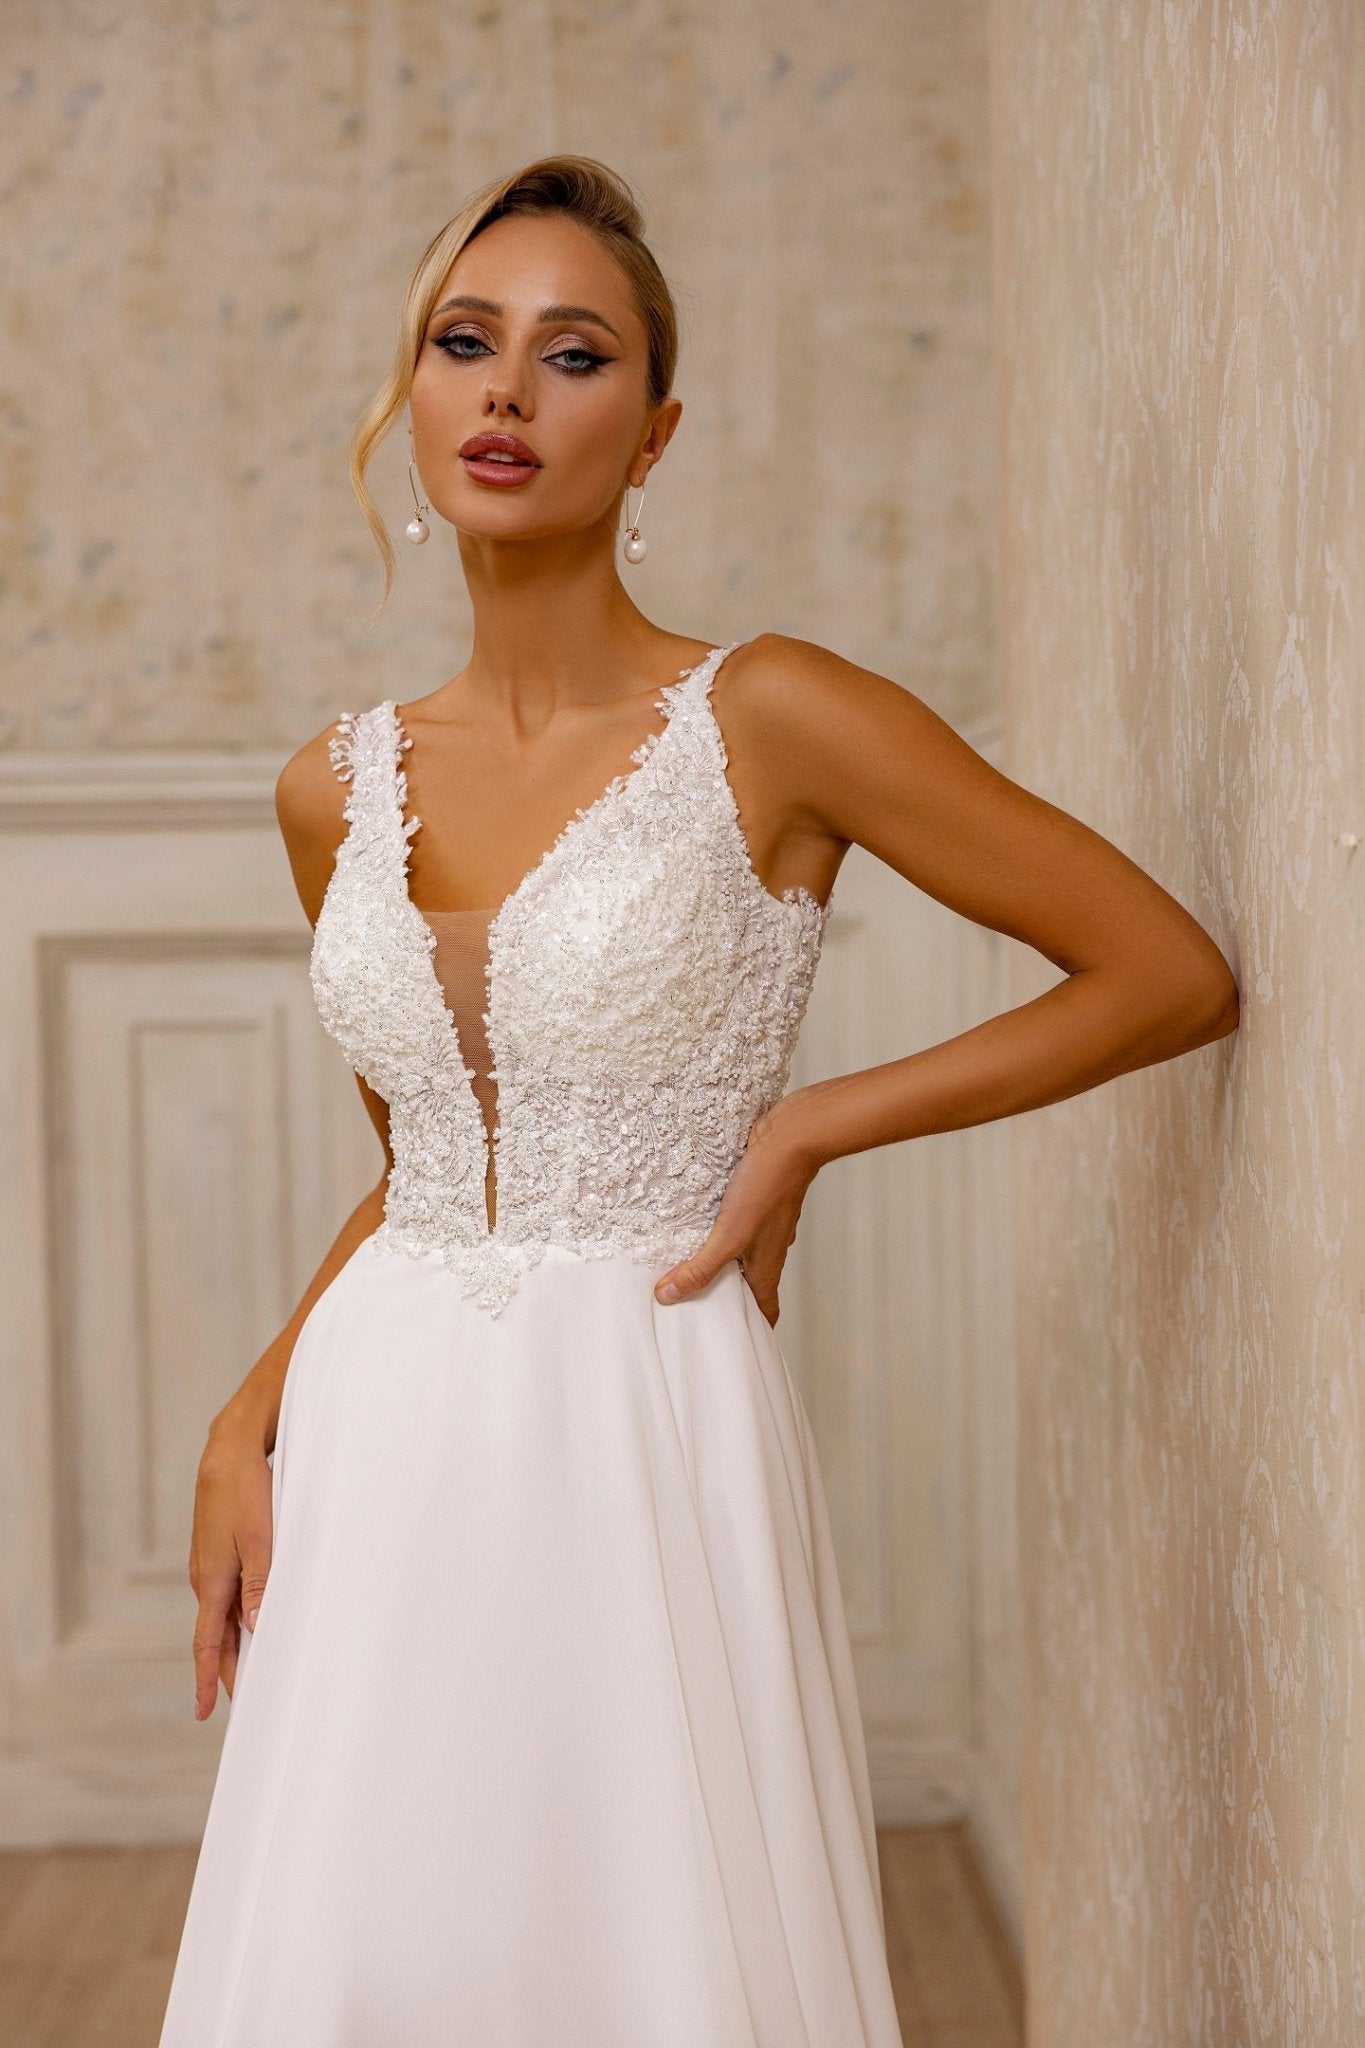 Sophisticated Floral Lace V-Neck Wedding Dress | Timeless A-Line Bridal Gown with Train - WonderlandByLilian